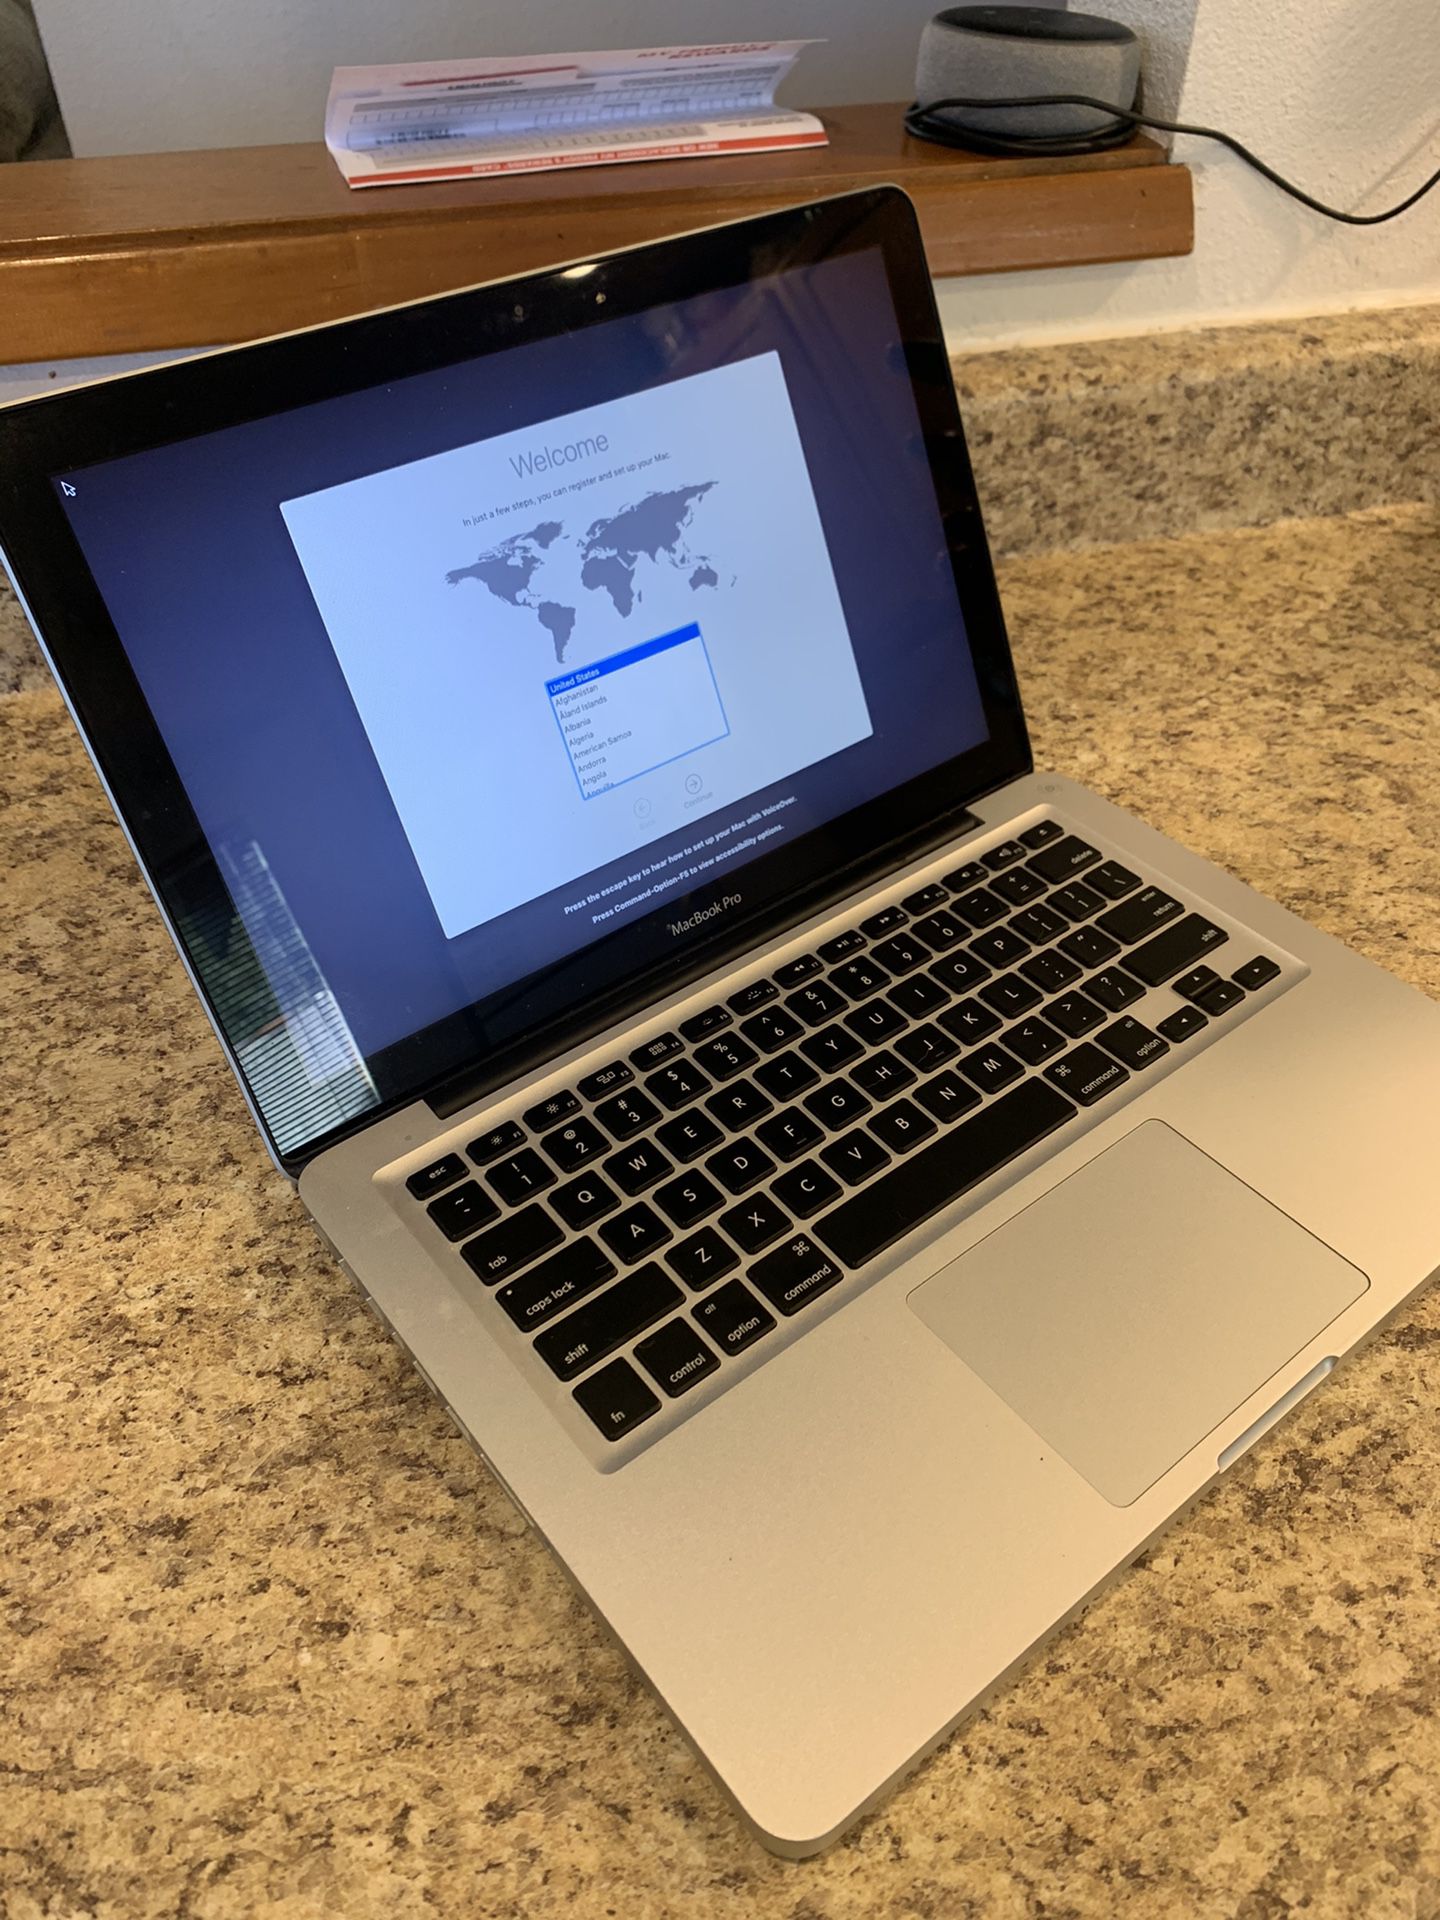 MacBook Pro 13 Mid 2012 2.5 GHz Intel Core i5 4GB 500GB HDD Good Condition